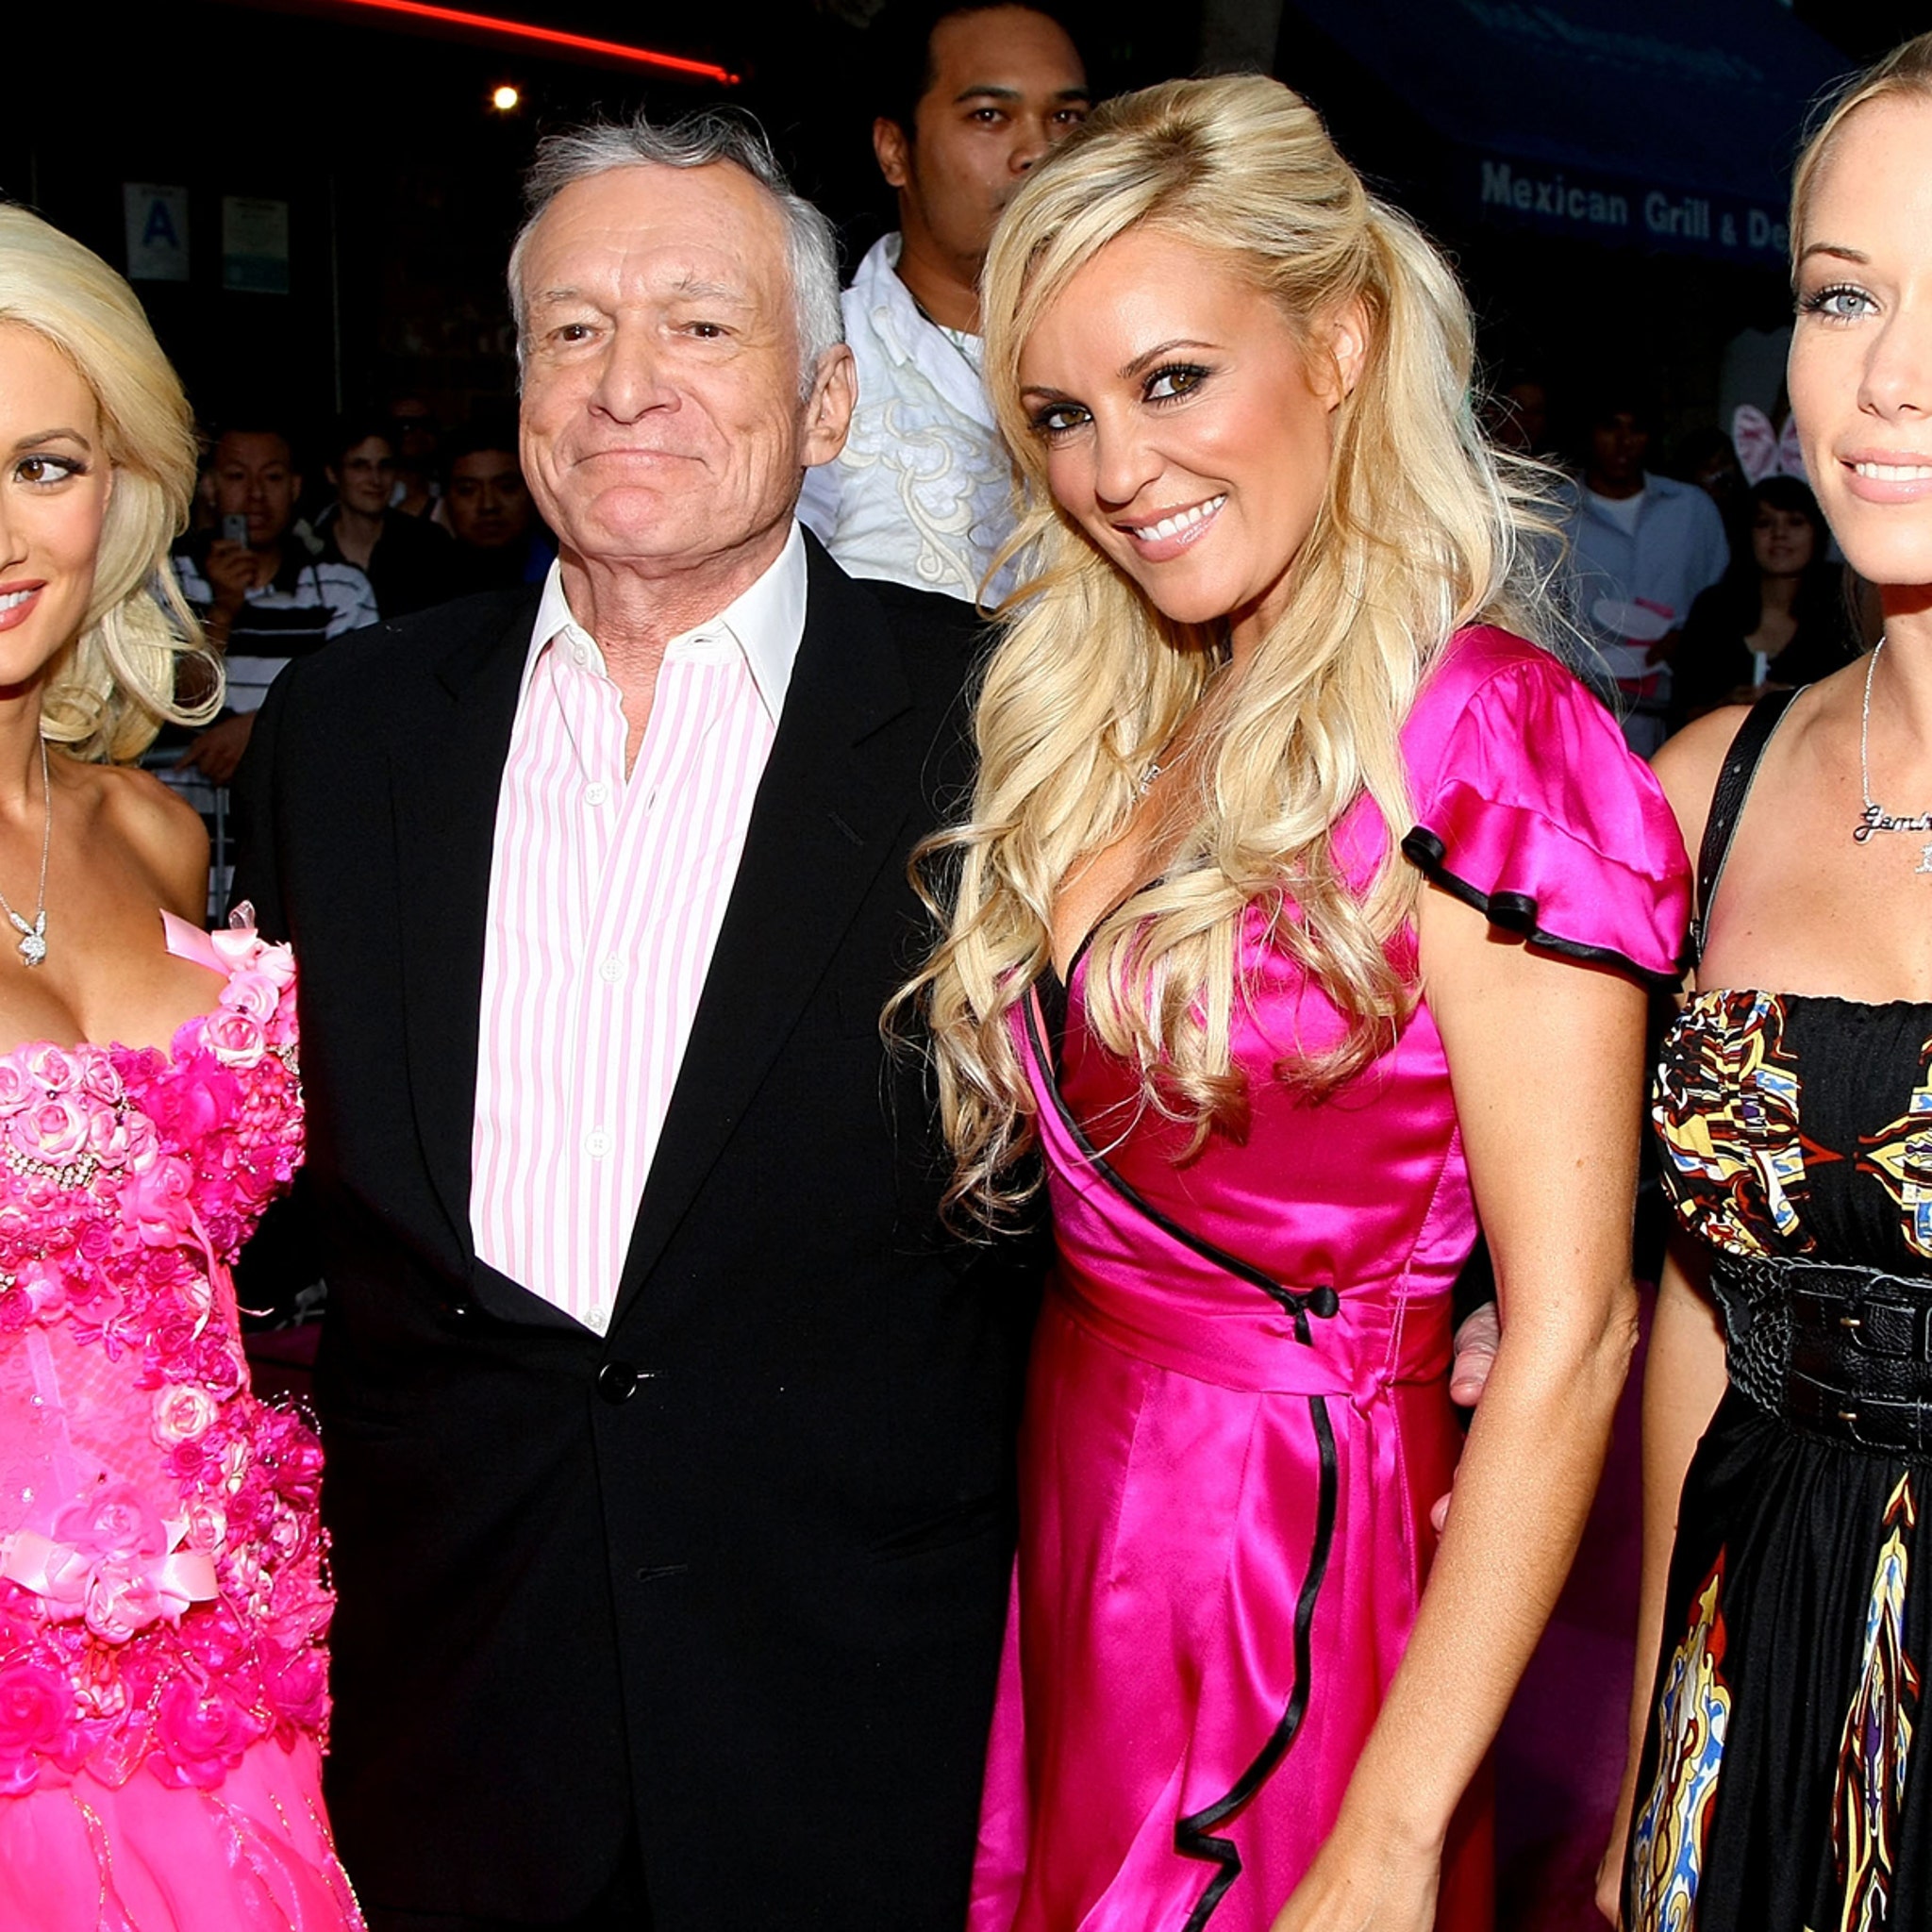 Holly Madison and Bridget Marquardt Reveal Playboy Mansion Rules and Hefs Manipulation Tactics